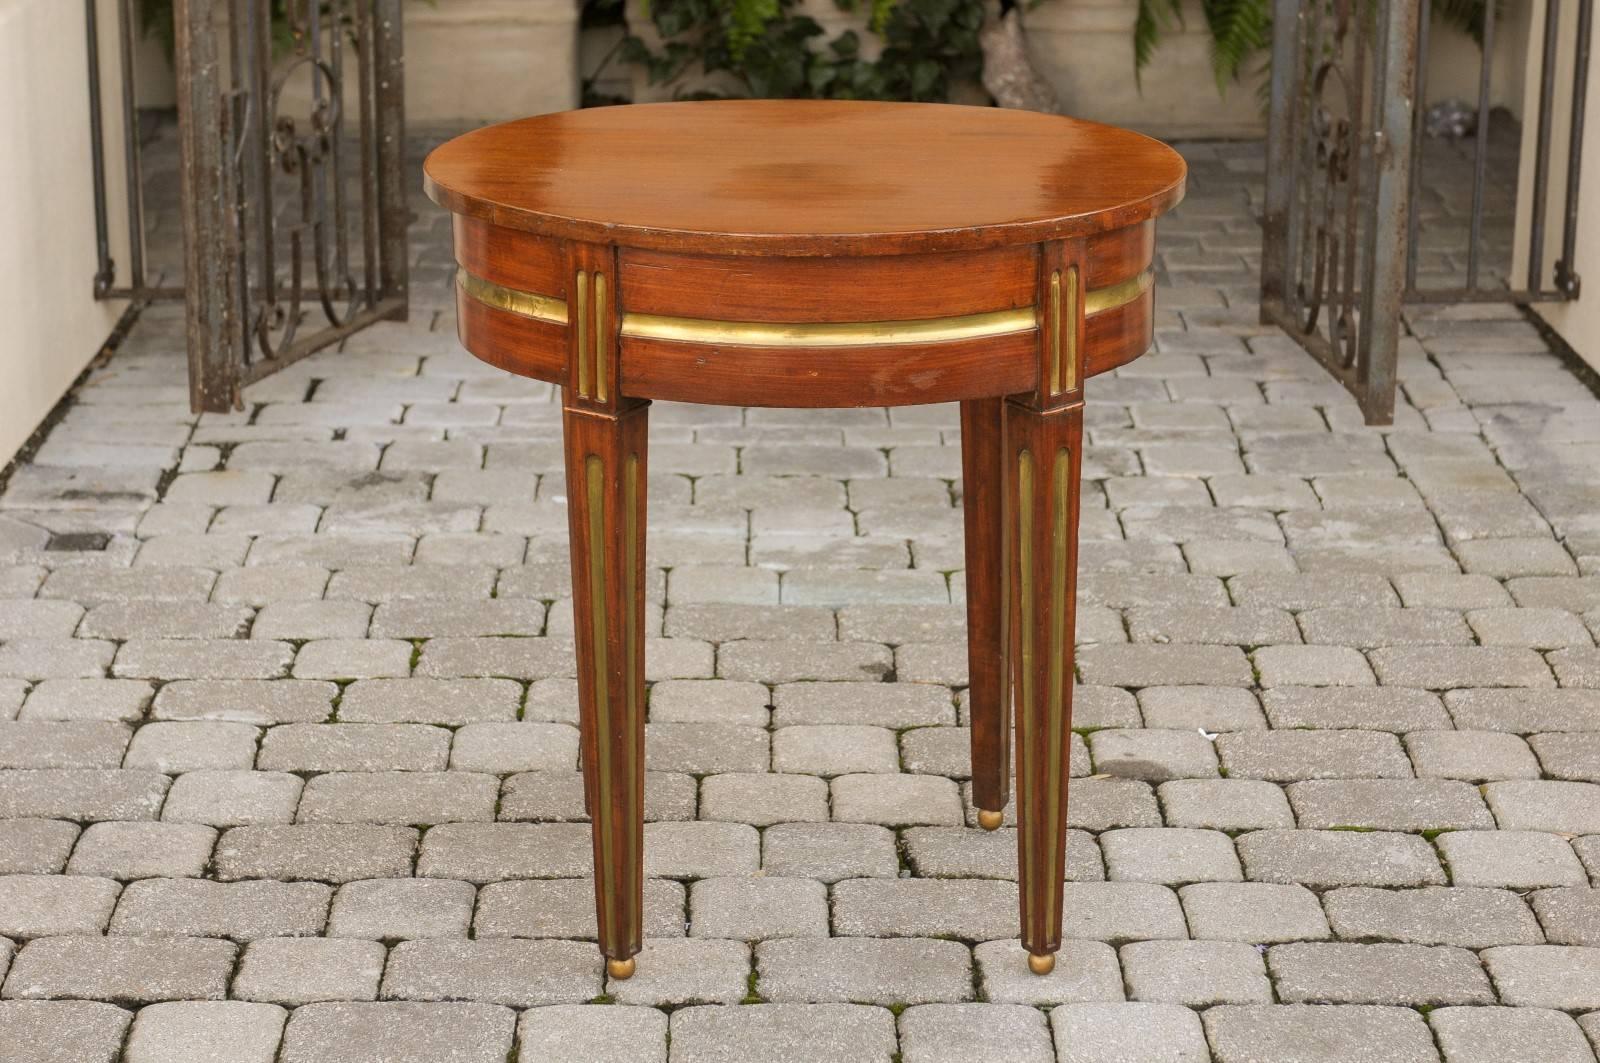 Russian 19th century Mahogany Oval Side Table with Brass Inlaid Elements  4